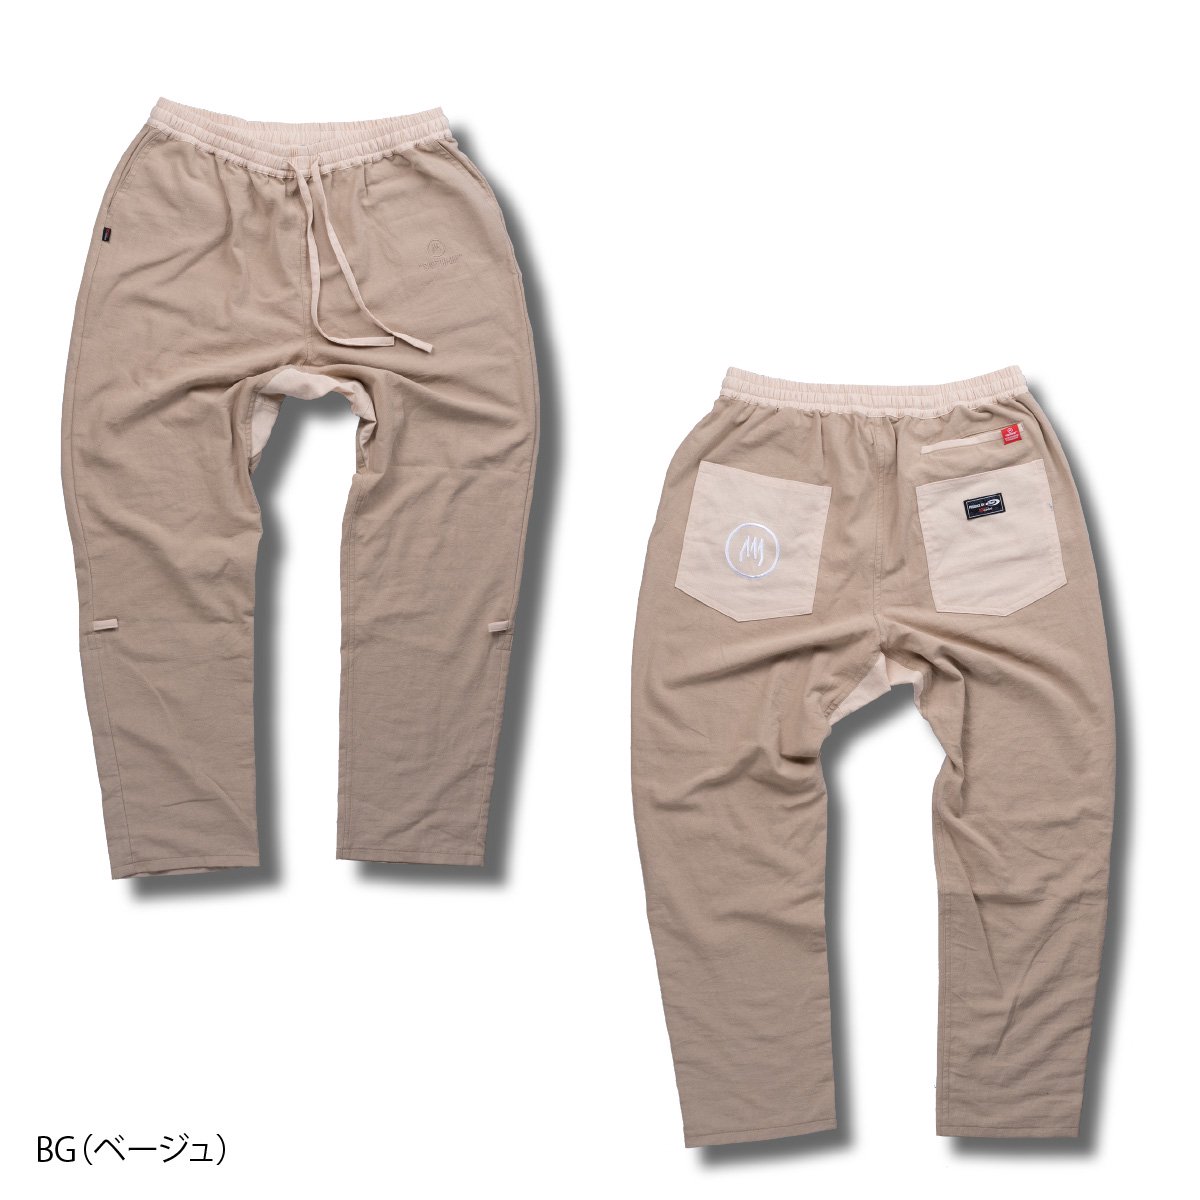 <img class='new_mark_img1' src='https://img.shop-pro.jp/img/new/icons15.gif' style='border:none;display:inline;margin:0px;padding:0px;width:auto;' />Ez comfort Pants